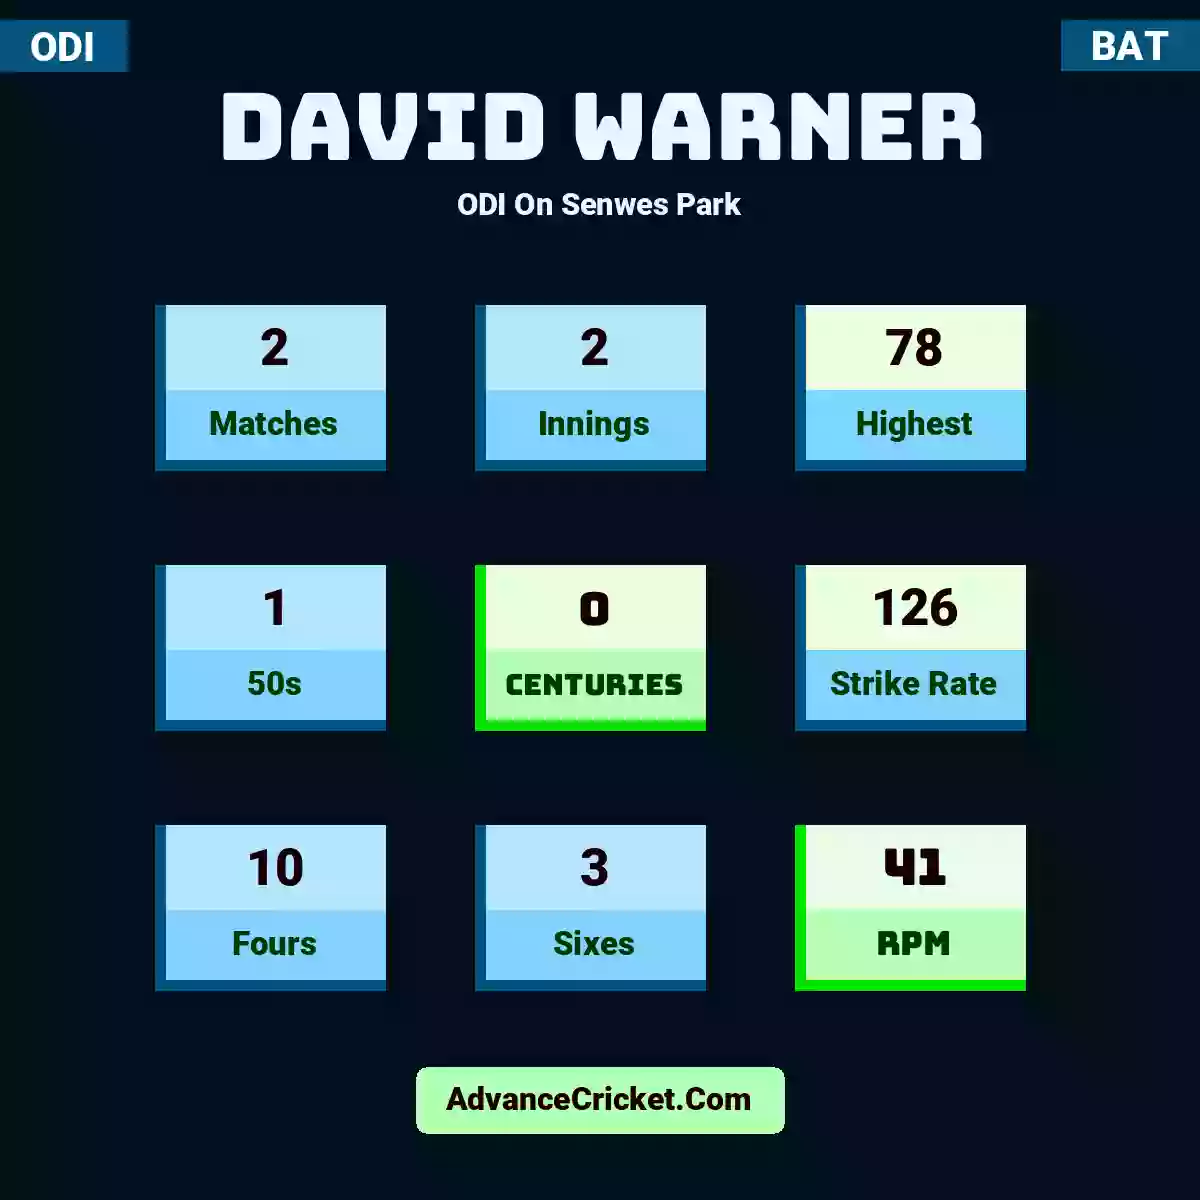 David Warner ODI  On Senwes Park, David Warner played 2 matches, scored 78 runs as highest, 1 half-centuries, and 0 centuries, with a strike rate of 126. D.Warner hit 10 fours and 3 sixes, with an RPM of 41.